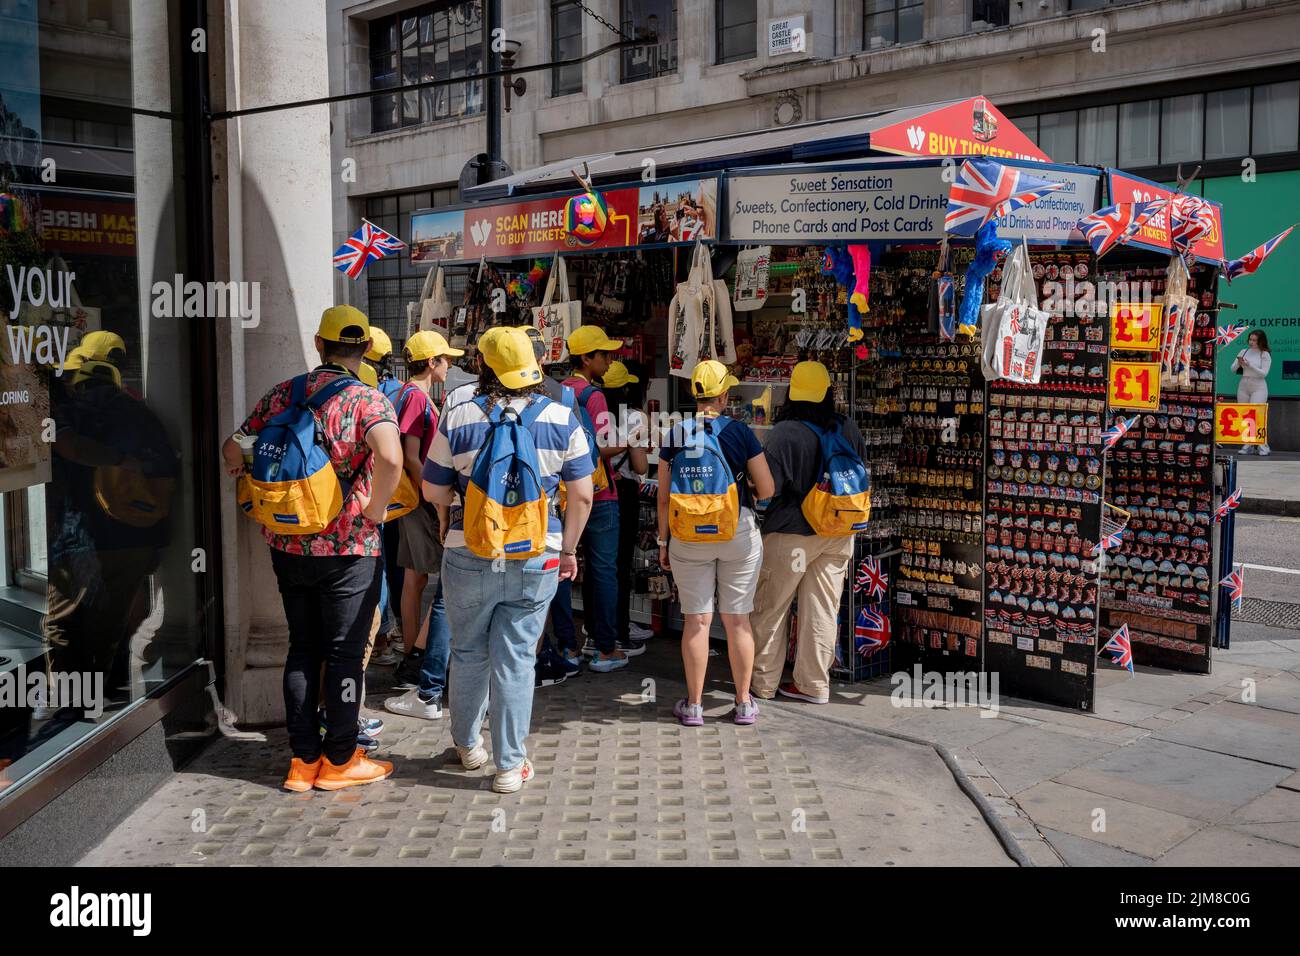 A tour group wearing identical yellow hats stand at a tourist souvenir kiosk in Regent Street in the West End, on 3rd August 2022, in London, England. Stock Photo